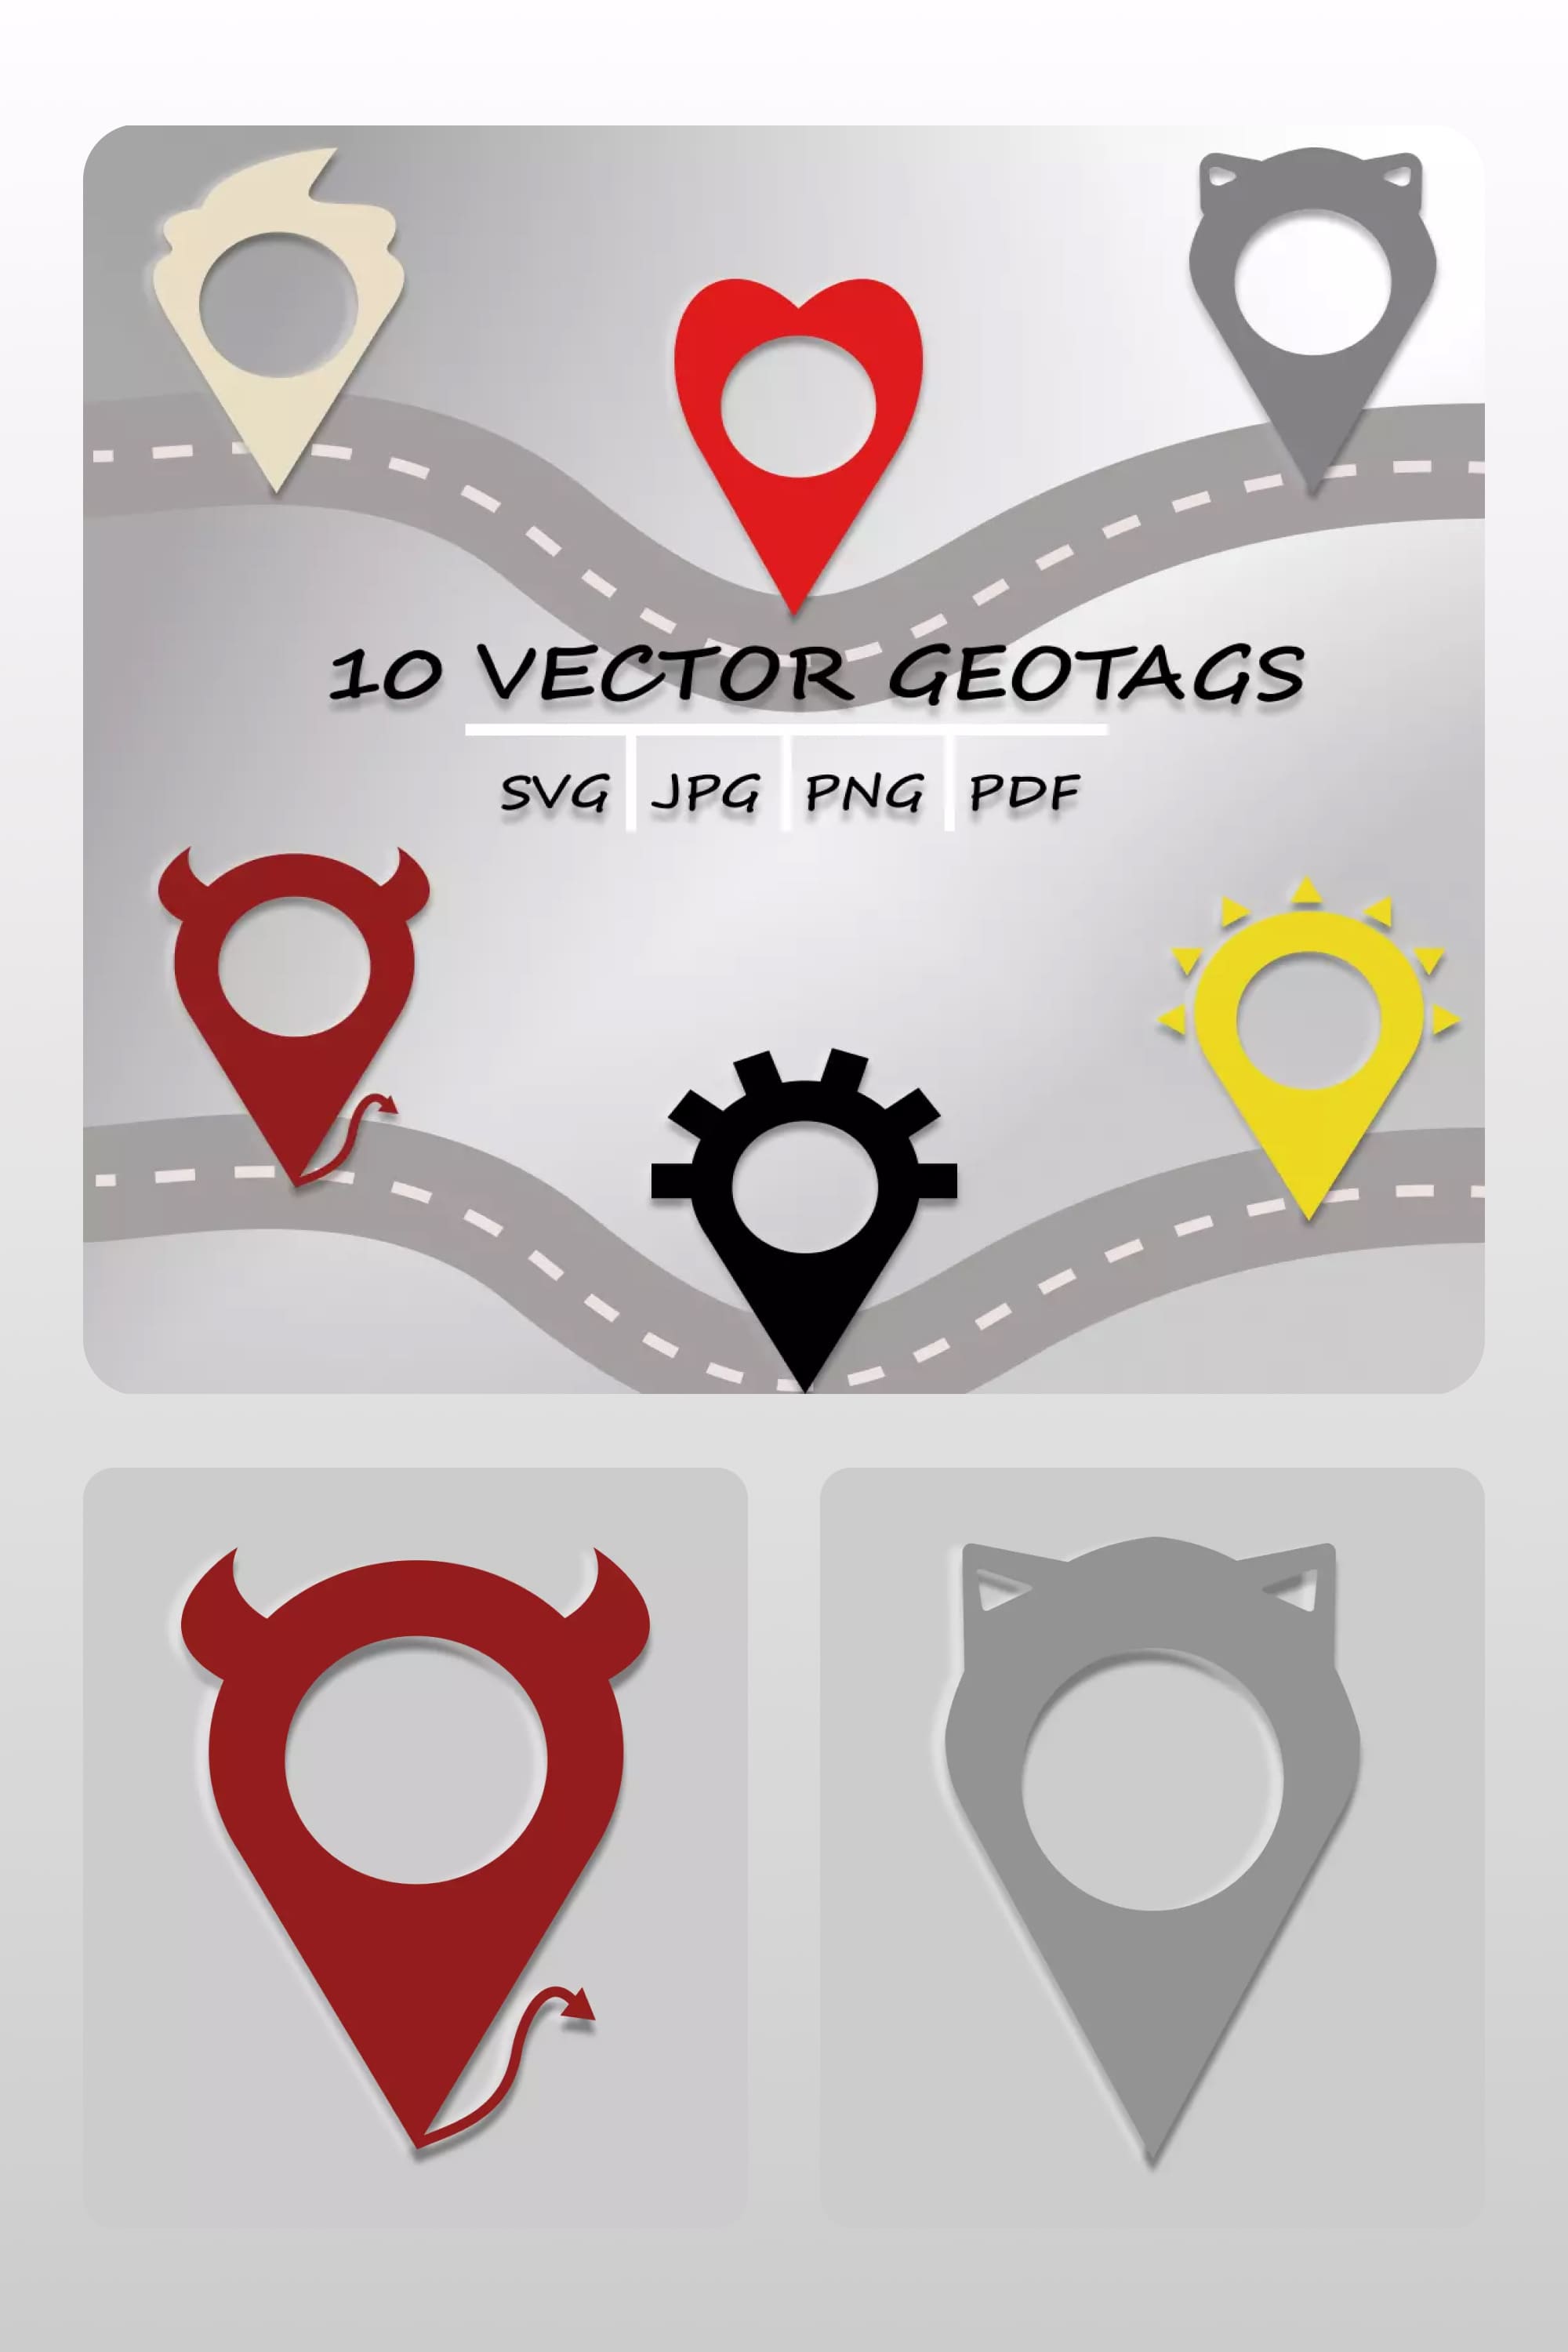 Multicolored icons for geotagging on a gray background.